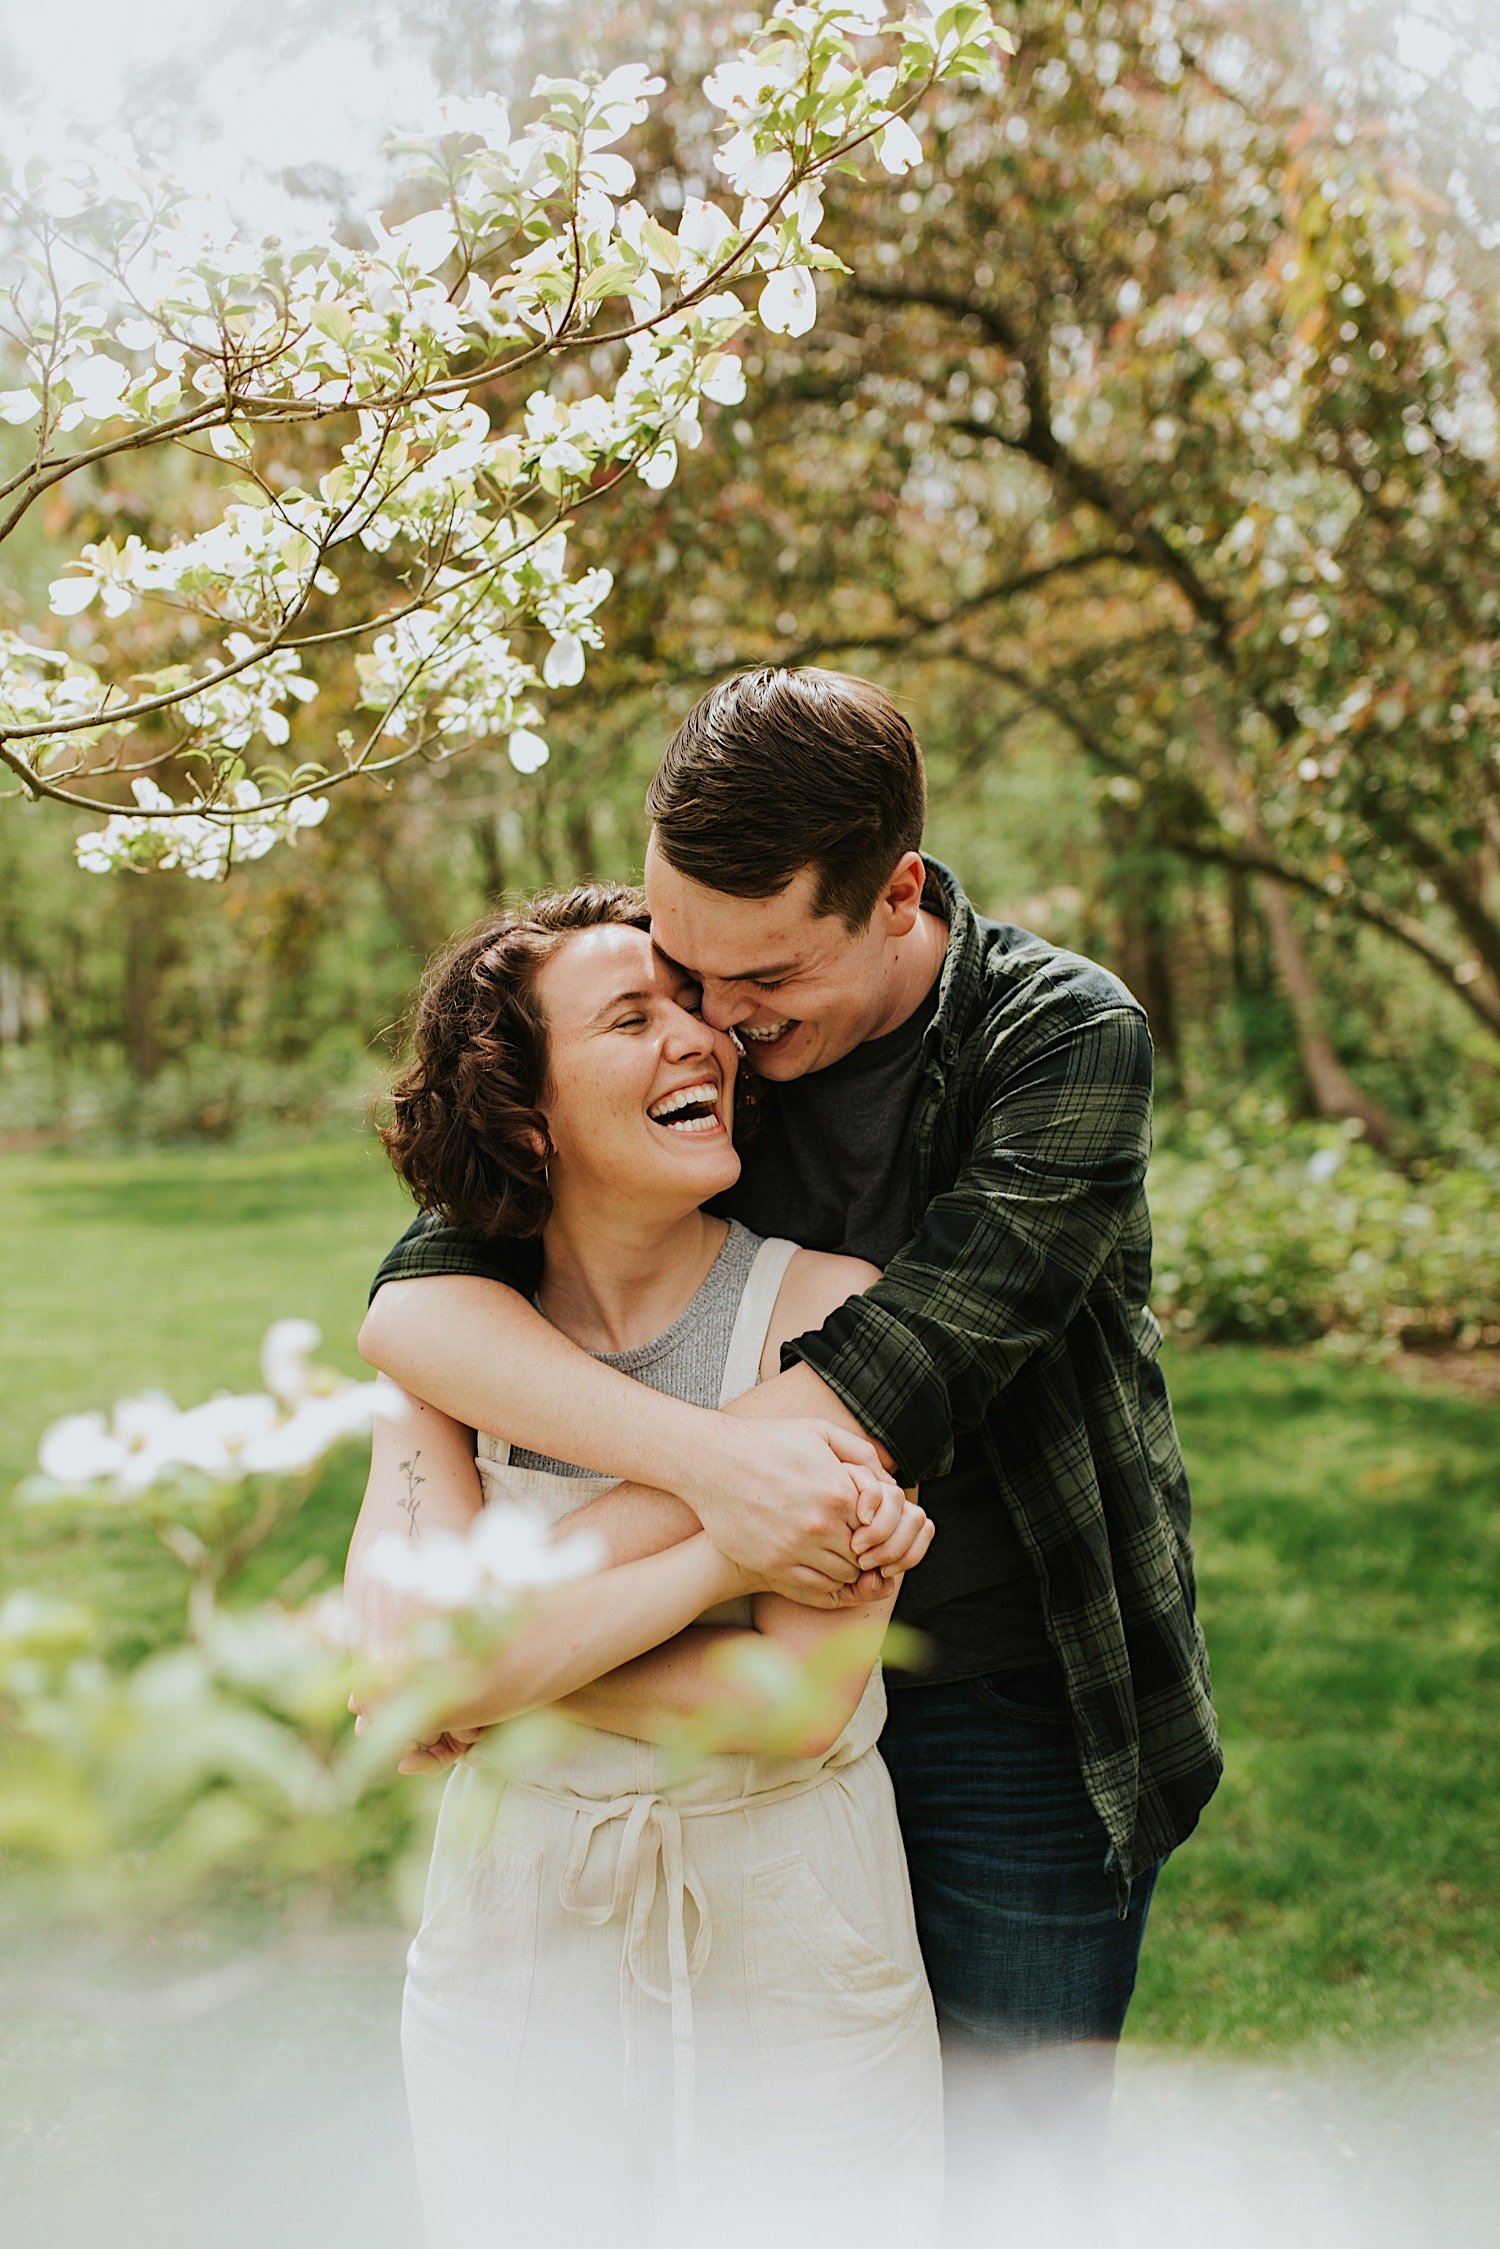 future groom holds his future bride under a tree with white flowers in a park in Normal Illinoisas they both laugh